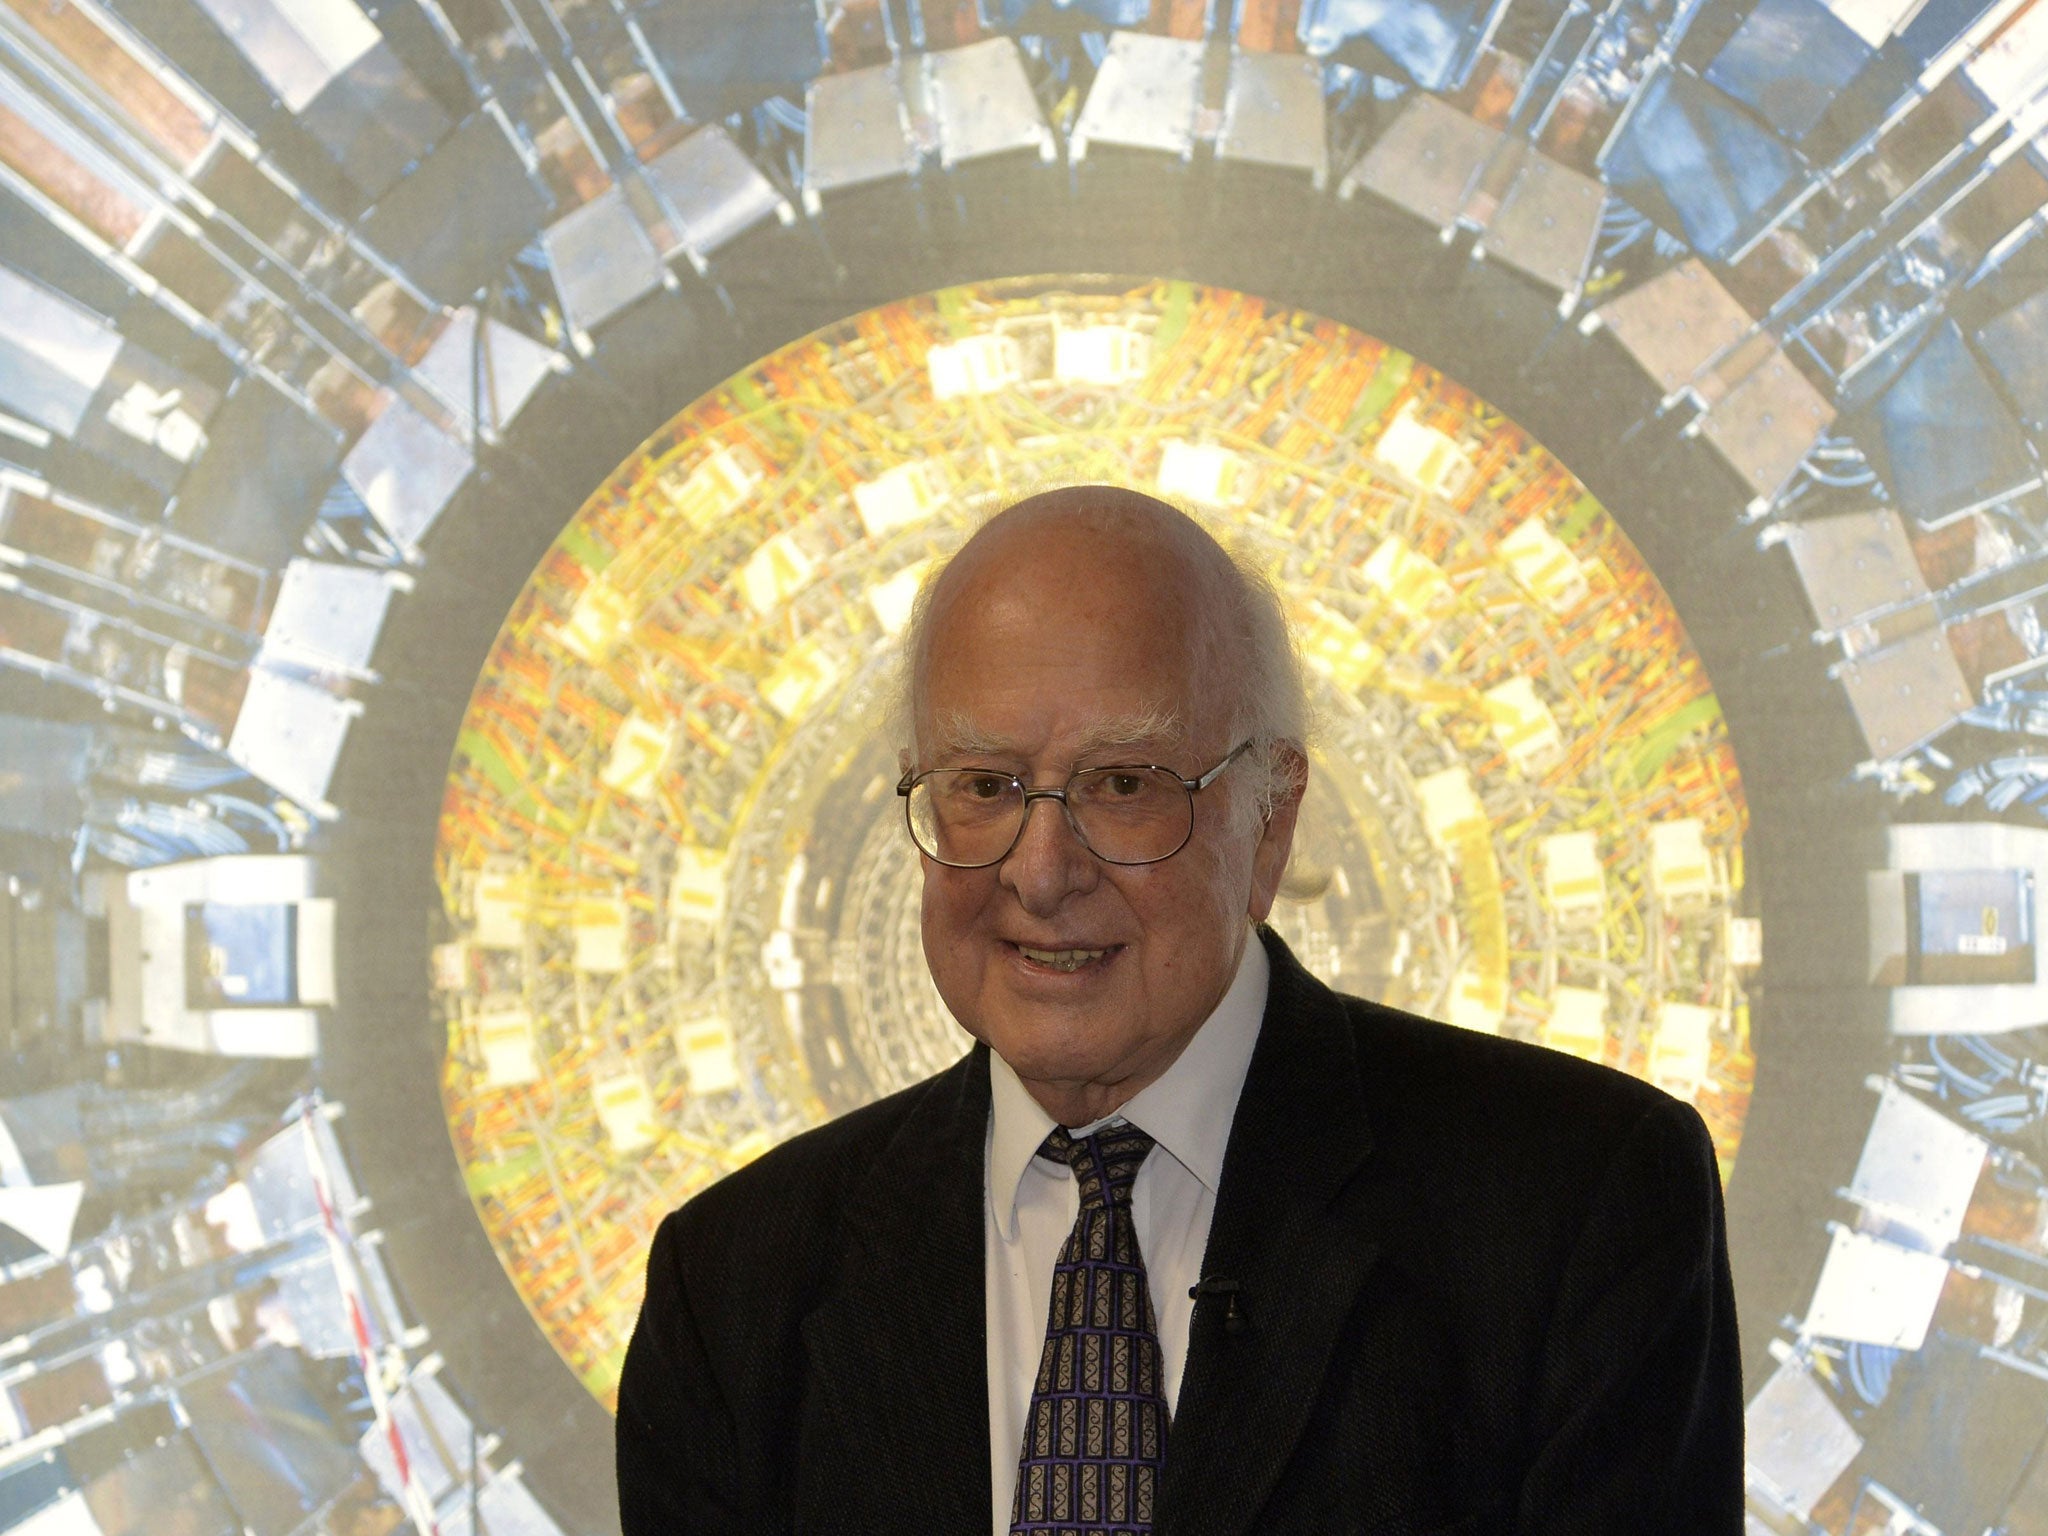 Peter Higgs is to be honoured with a new £11m space technology centre named after him